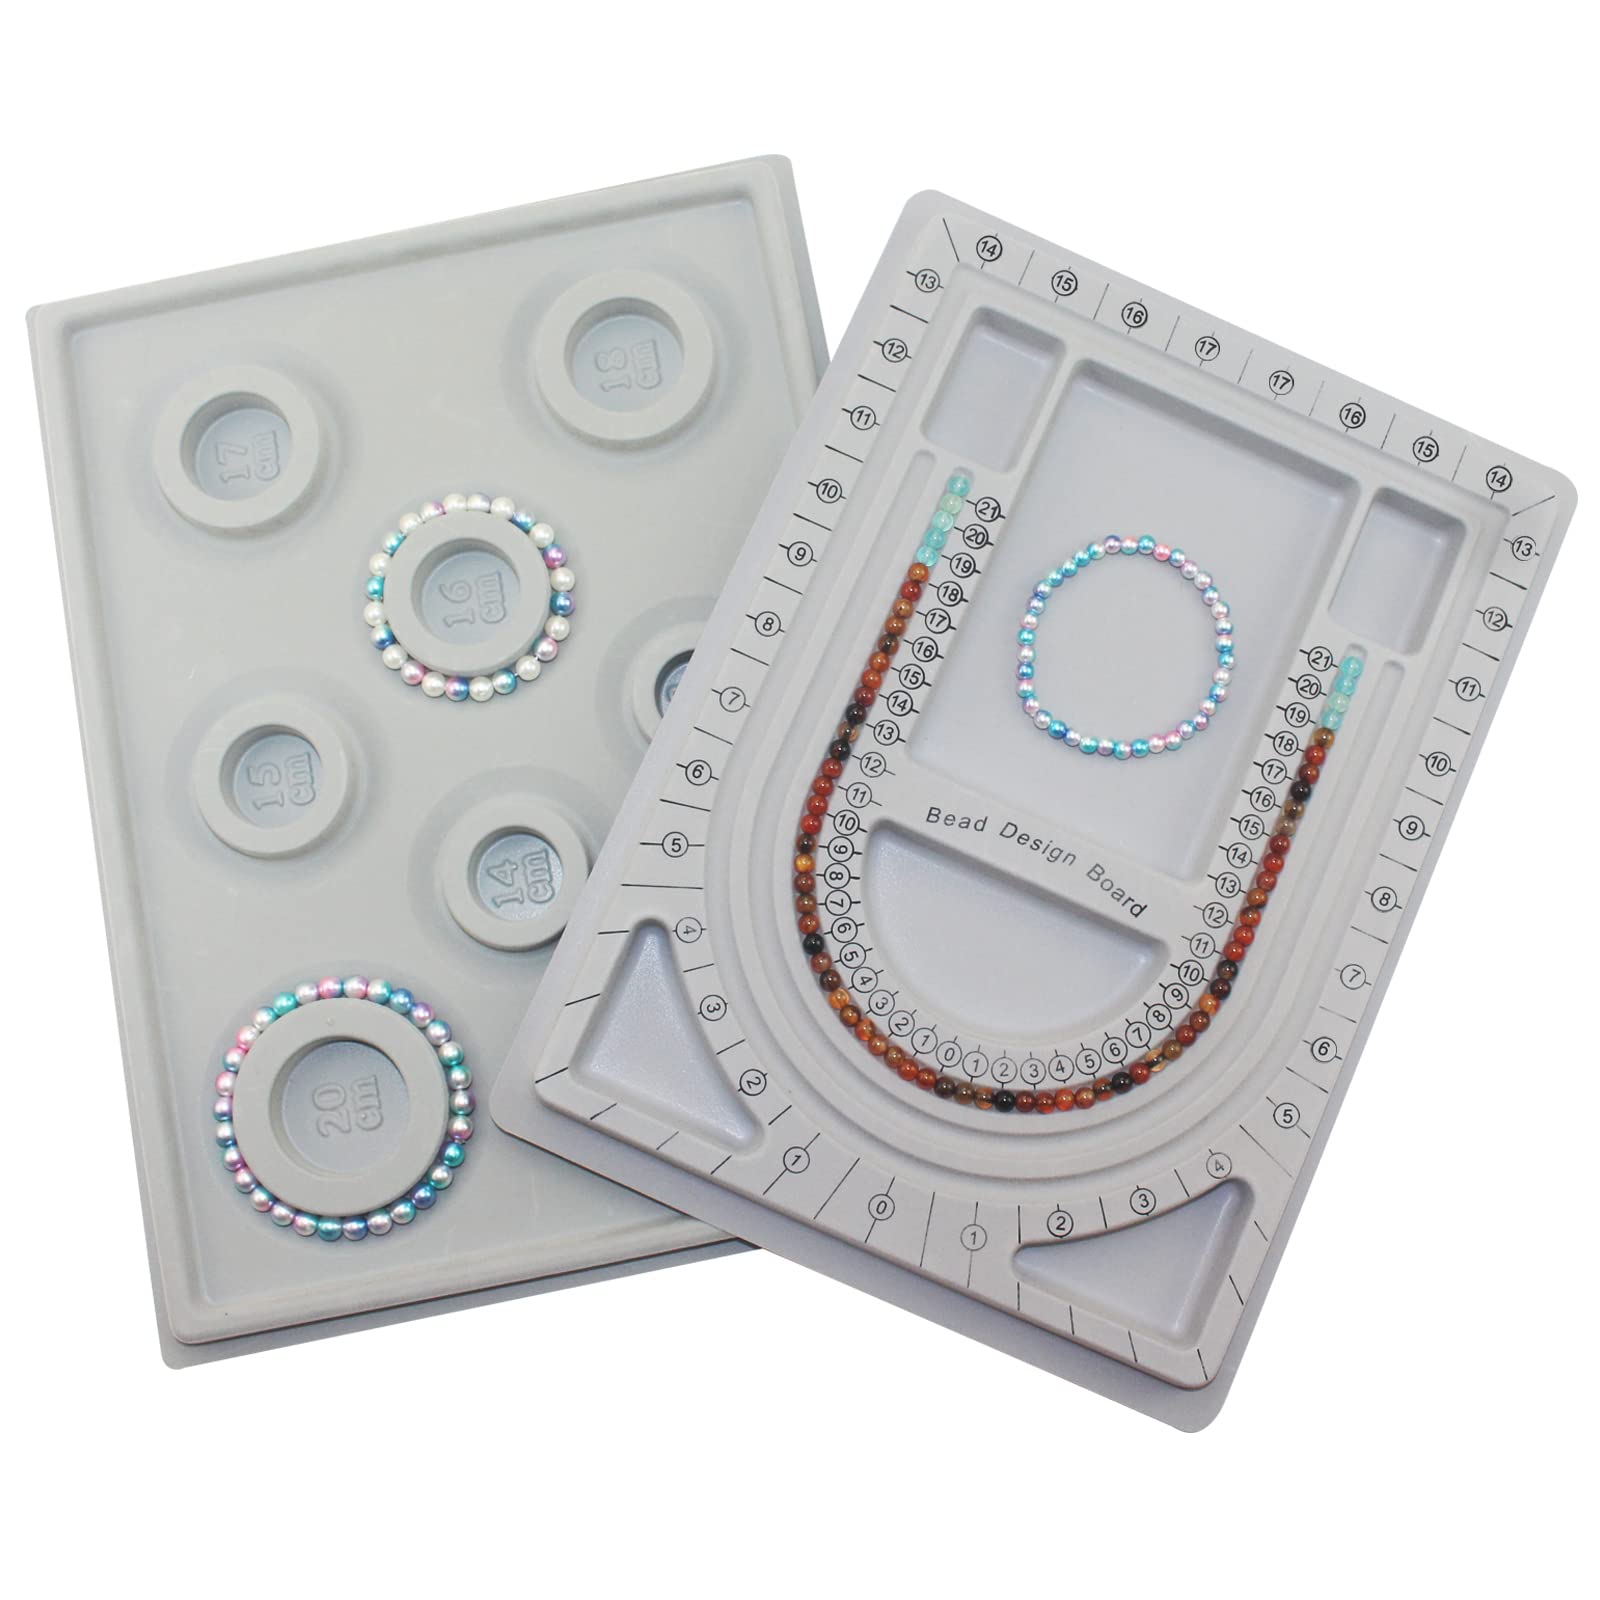 PP OPOUNT 3 PCS Hard Back Bead Mats, Bead Tray with Grids and Scales, Bead  Mat for Jewelry Making, Bead Design Boards for DIY Necklaces and Bracelets